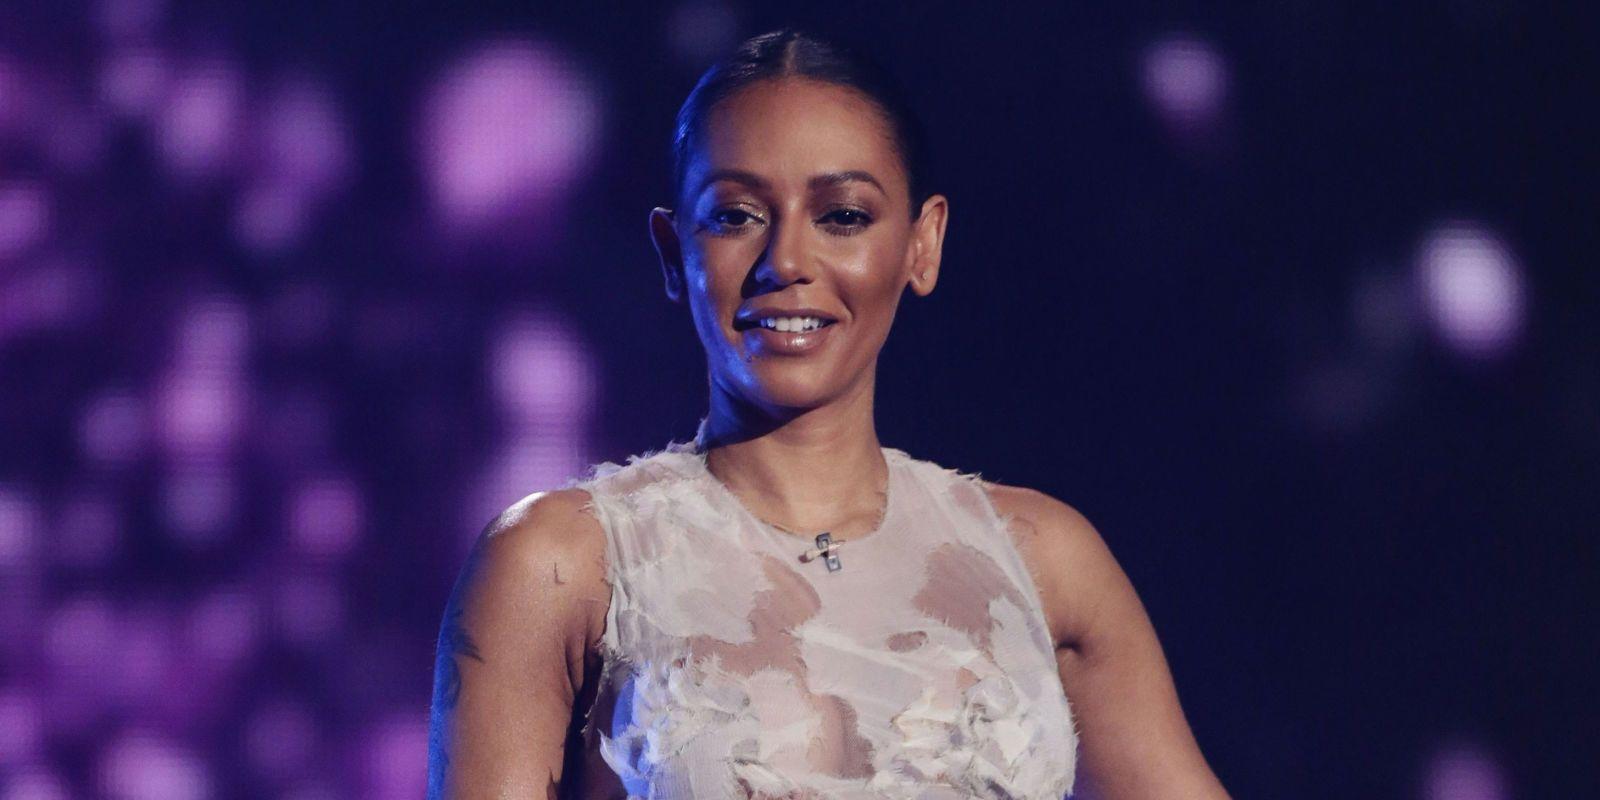 Domestic Abuse: Does Mel B Have a Responsibility to Speak Out